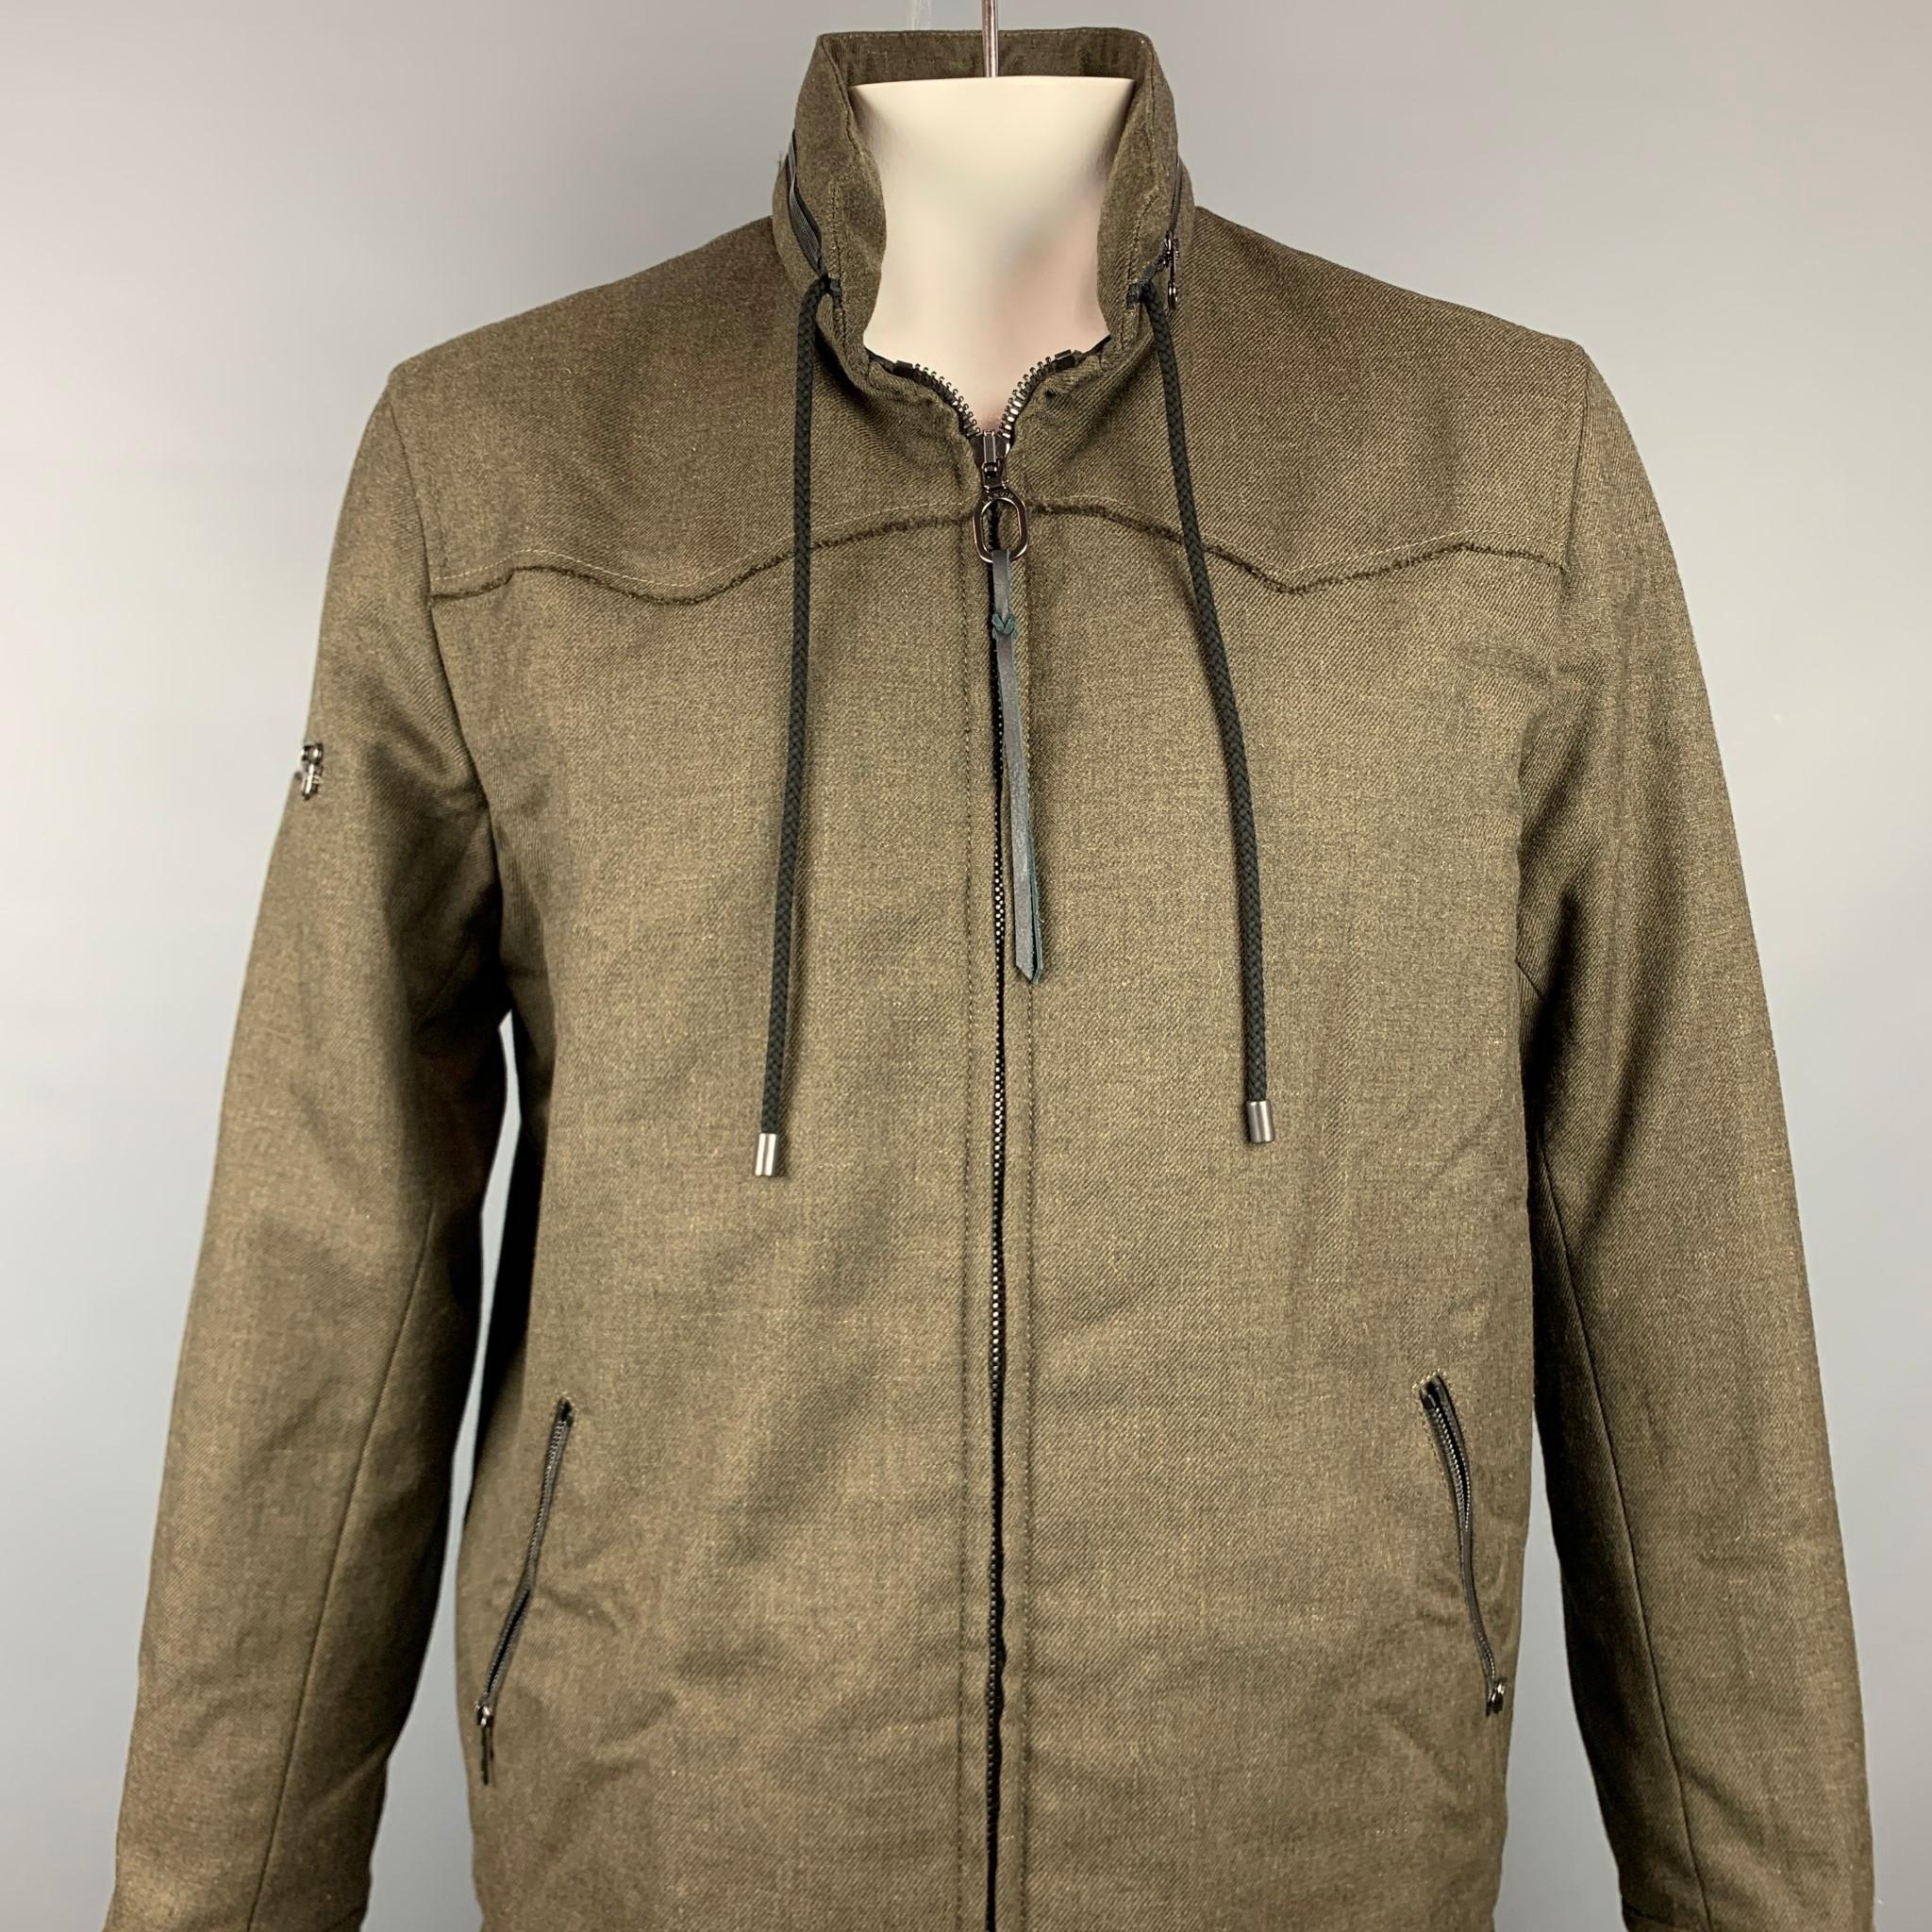 LANVIN jacket comes in a olive wool with a full liner featuring a adjustable hooded design, strap details, high collar, drawstring, ad a full zip up closure. Made in Romania.

Very Good Pre-Owned Condition.
Marked: EU 52

Measurements:

Shoulder: